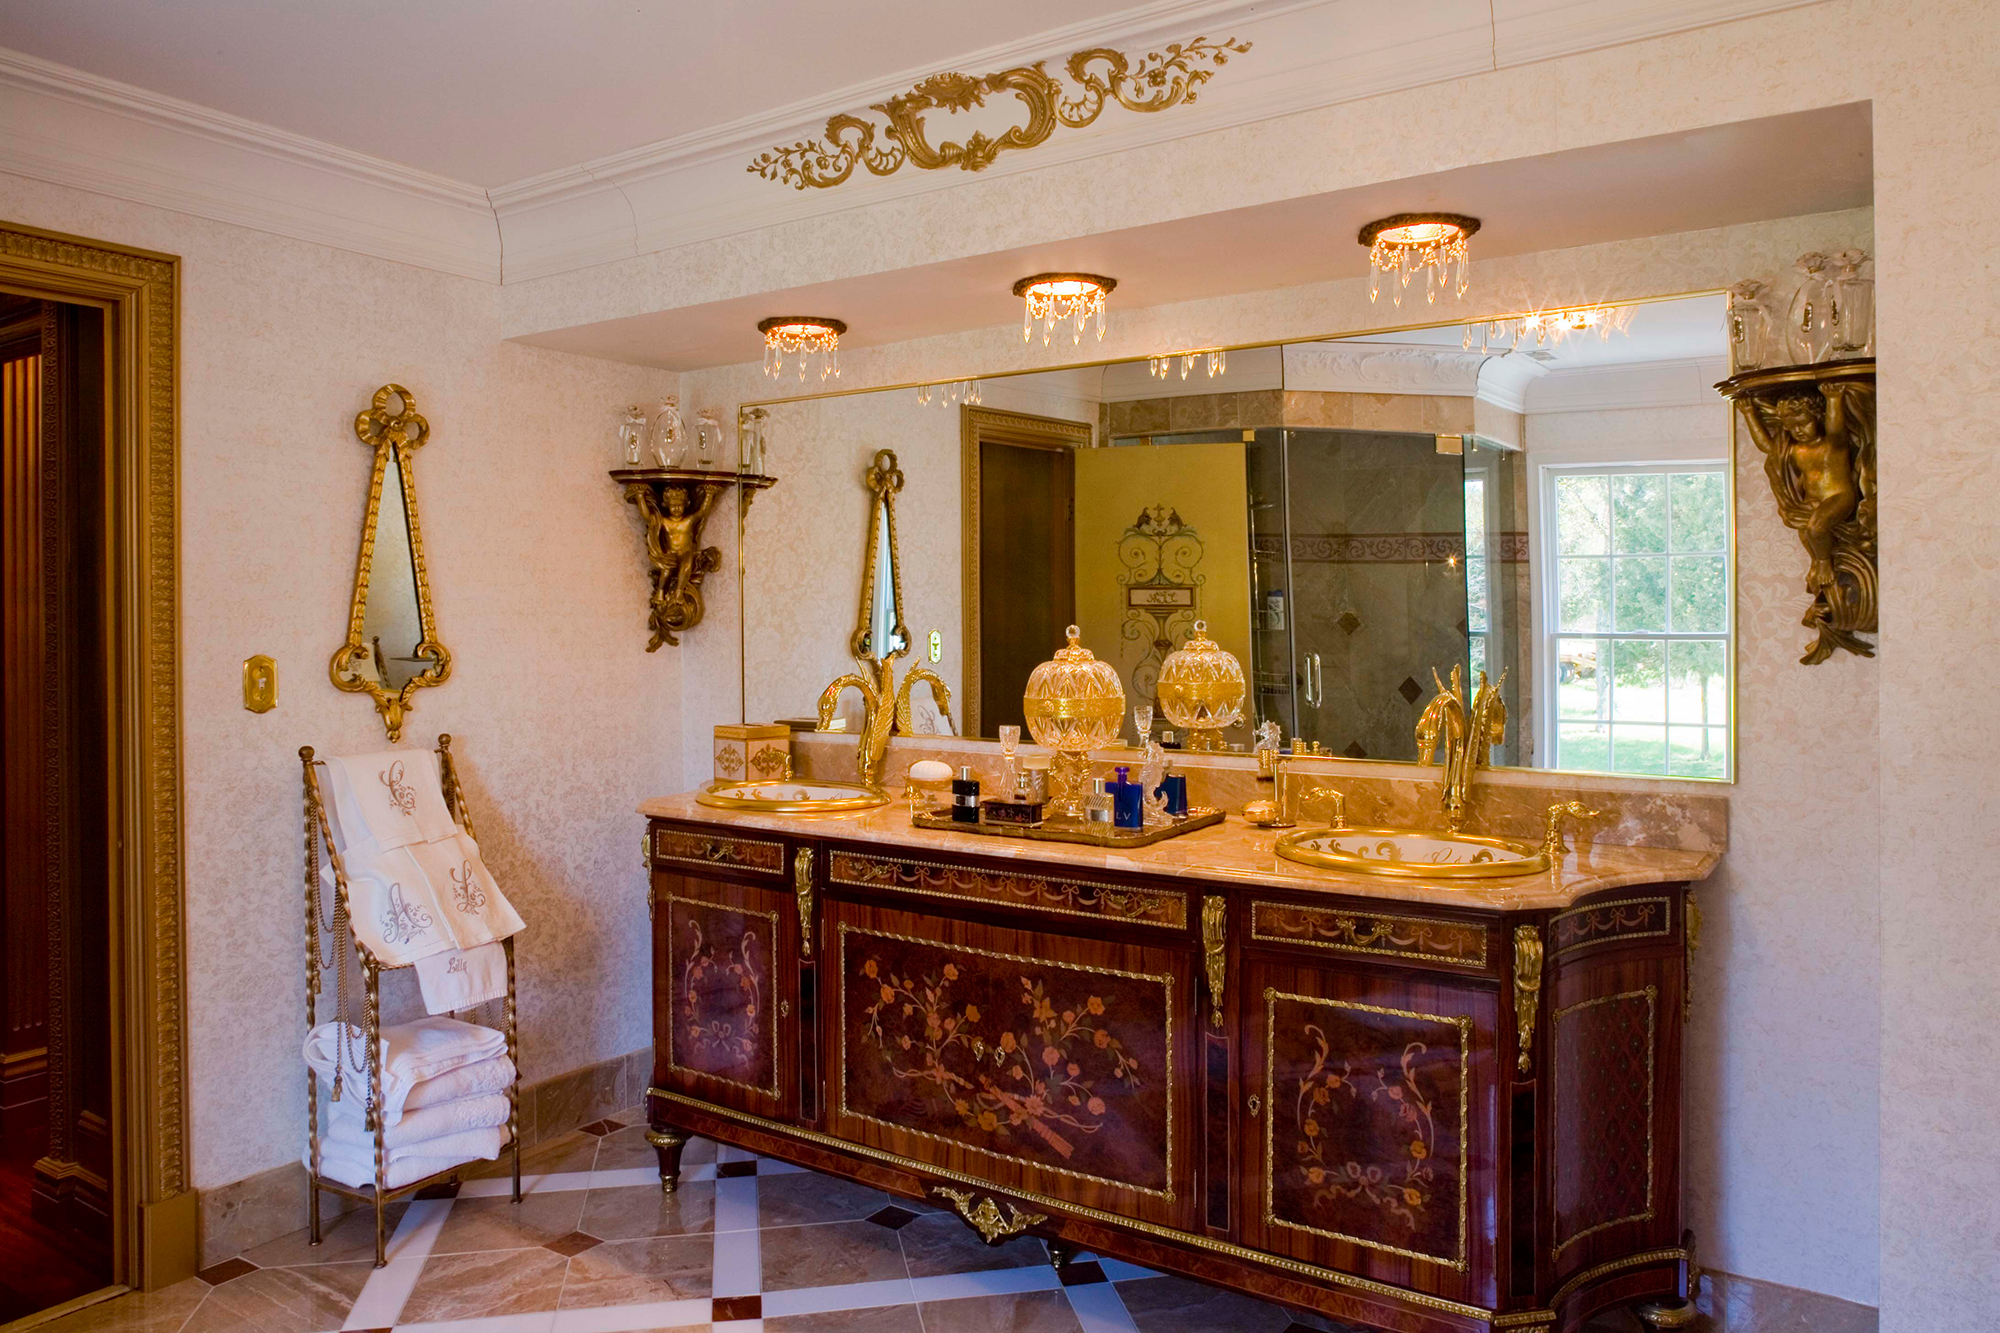 Recessed chandeliers over a Master Bath vanity.